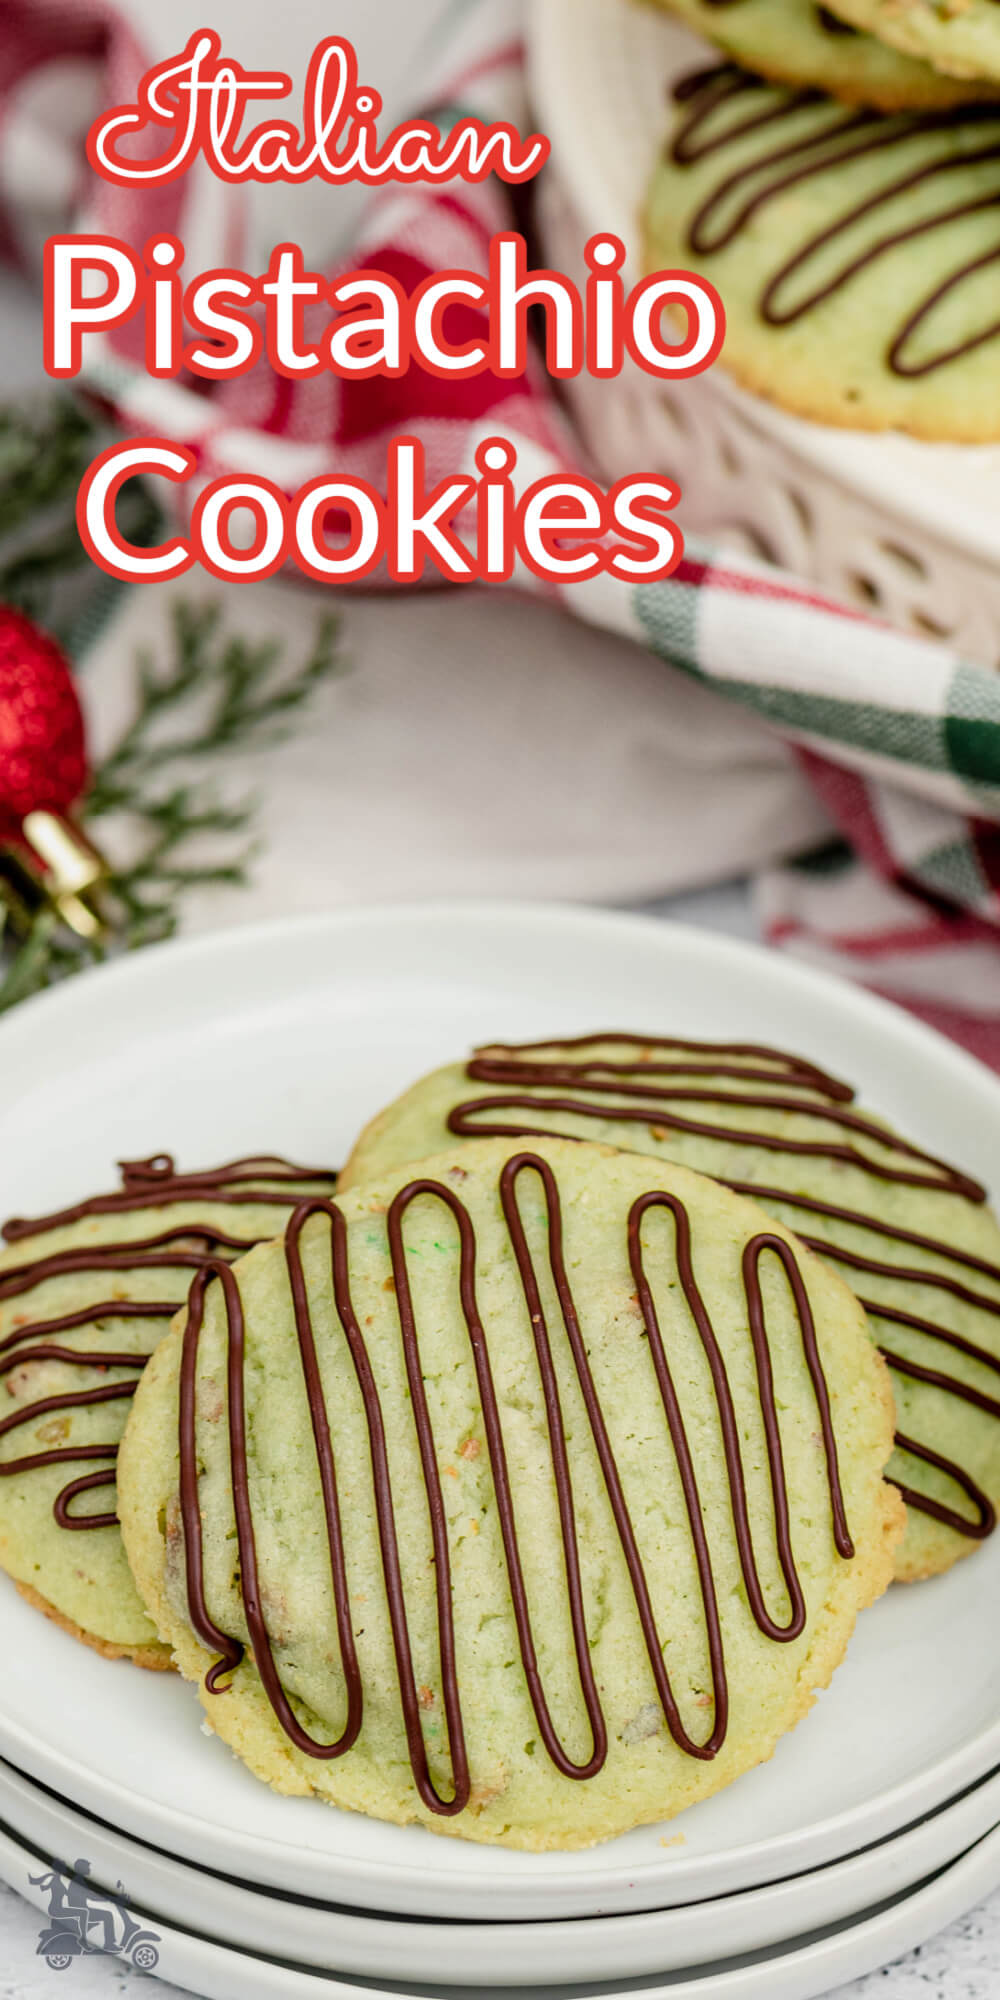 A soft and chewy pistachio cookie made with pistachio pudding and crushed pistachio is the first Christmas cookie we make every year. The drop cookies are delicious and welcome at cookie exchanges. These Italian biscotti have a festive green hue with a pretty chocolate drizzle on top. #pistachiocookies, #ItalianChristmascookie, #